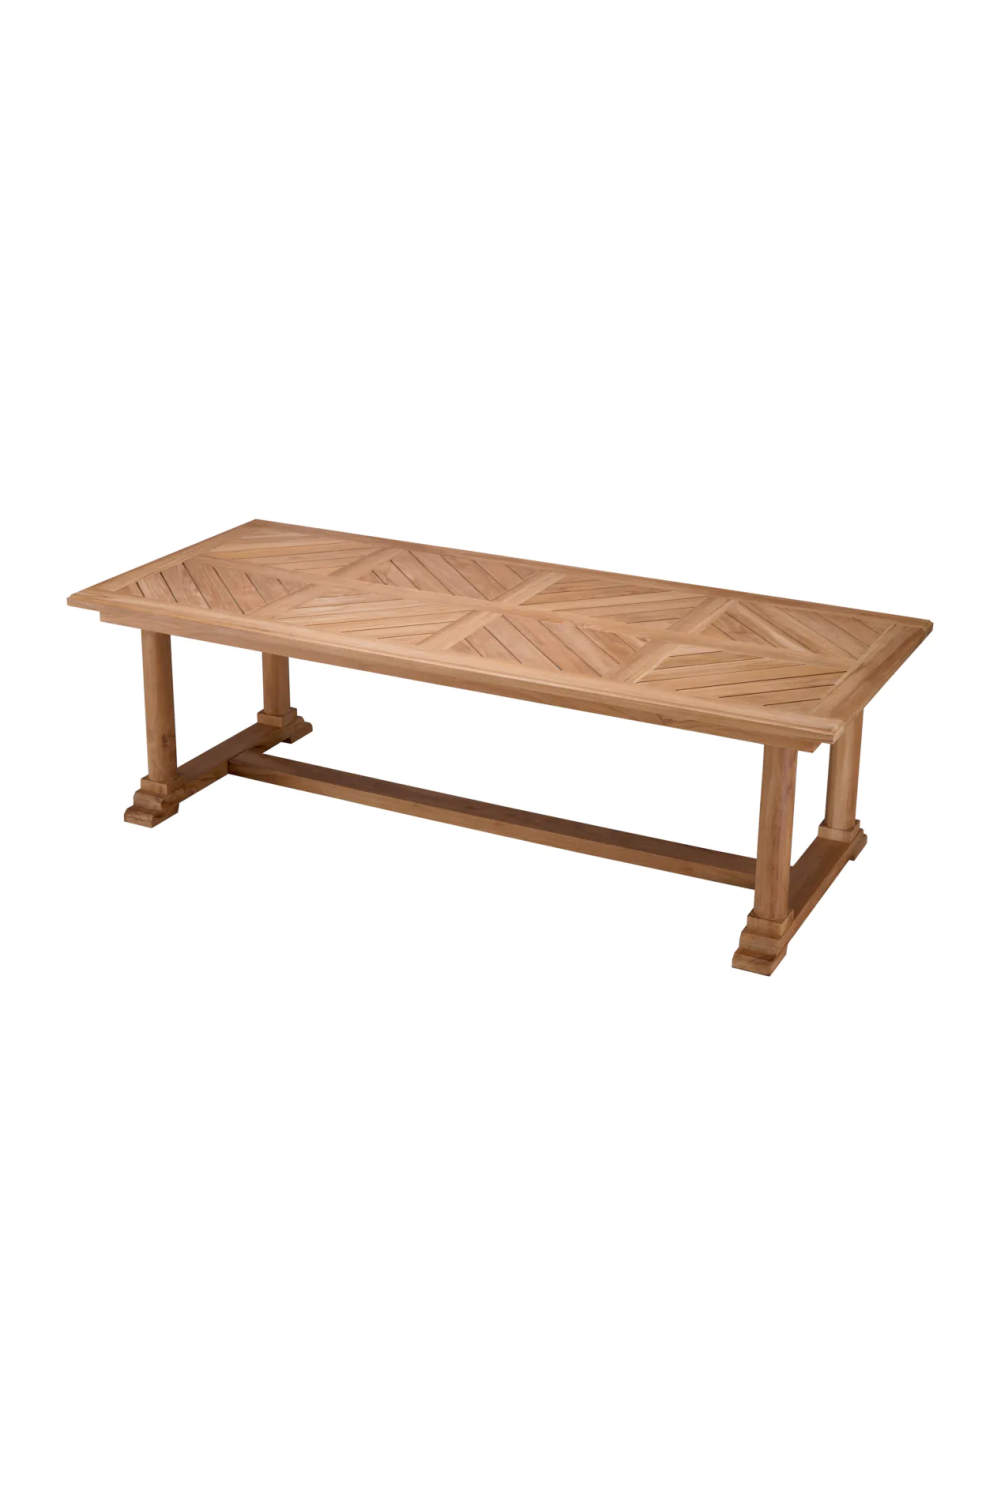 Wooden Outdoor Dining Table | Eichholtz Bell Rive | Oroa.com